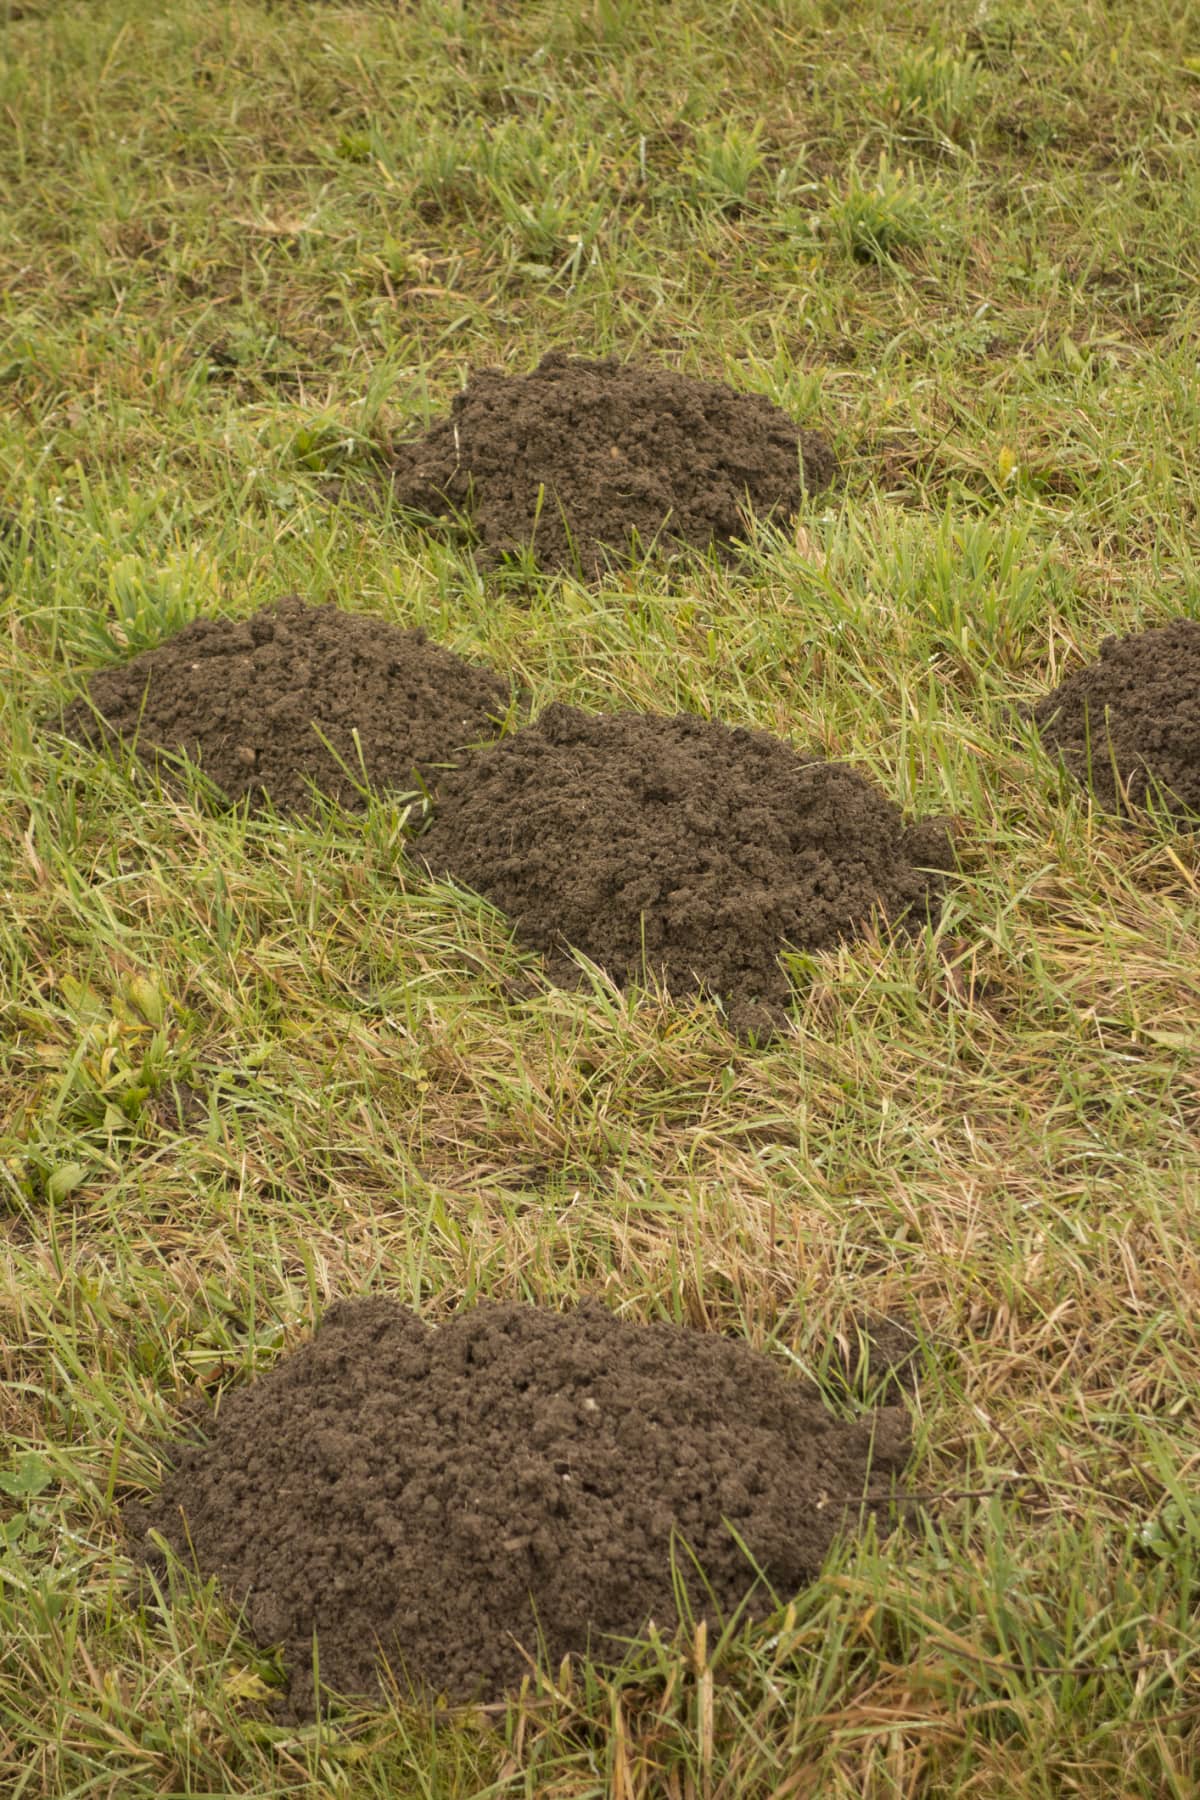 Holes in the ground dug by moles